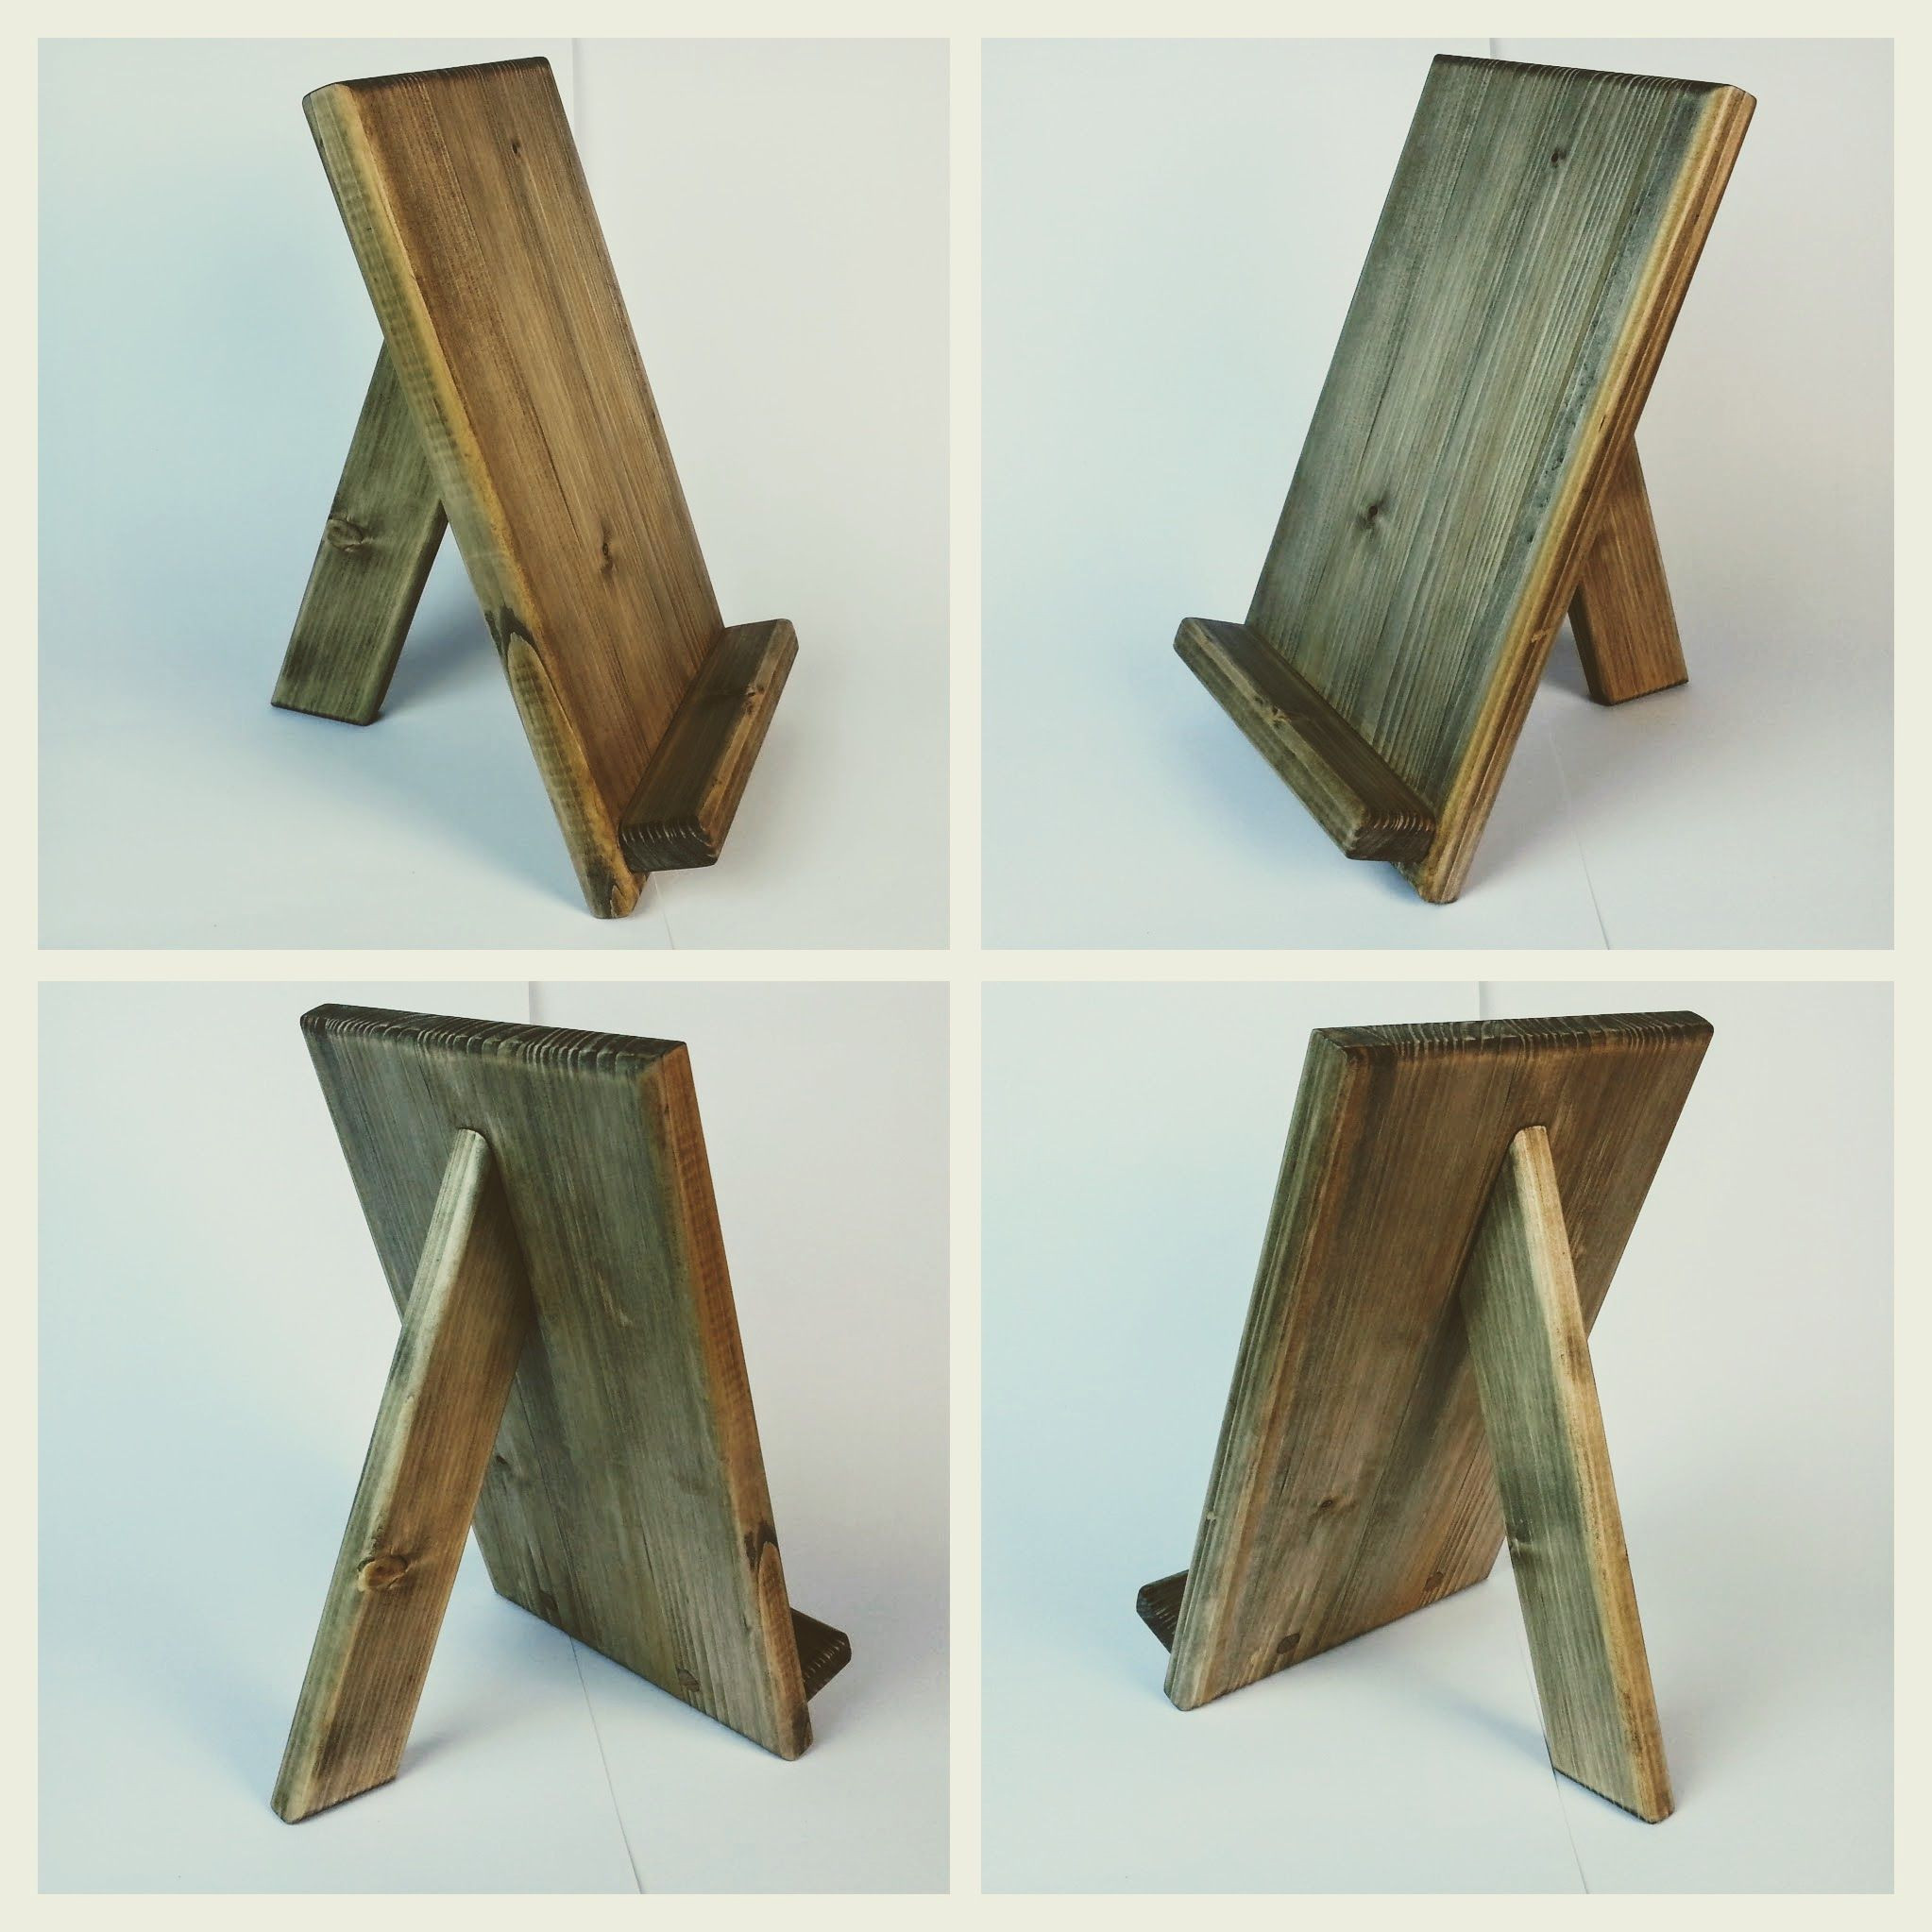 DIY Ipad Stand Wood
 Wooden tablet holder iPad stand Woodworking